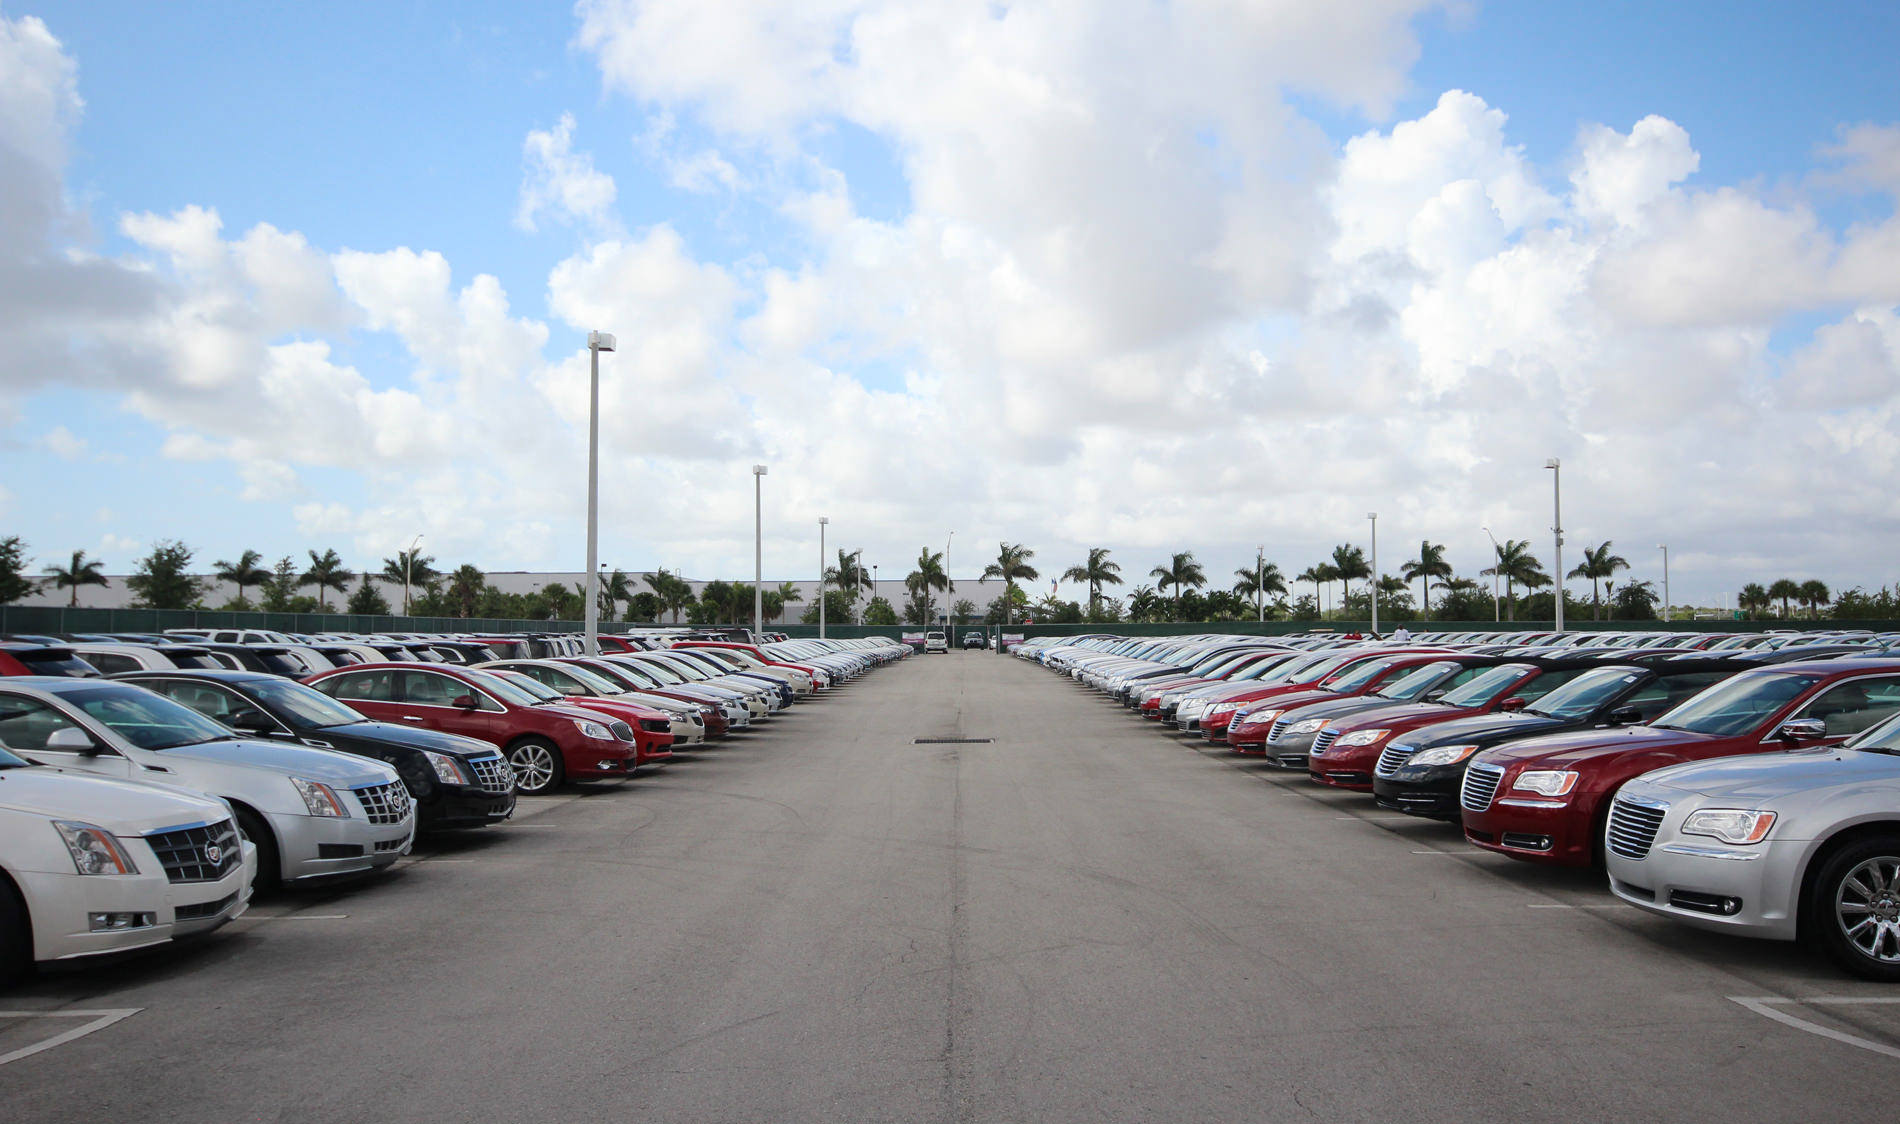 OffLeaseOnly is Proud to Offer Customers Thousands of Used Cars for Sale All Priced Thousands Below Retail!